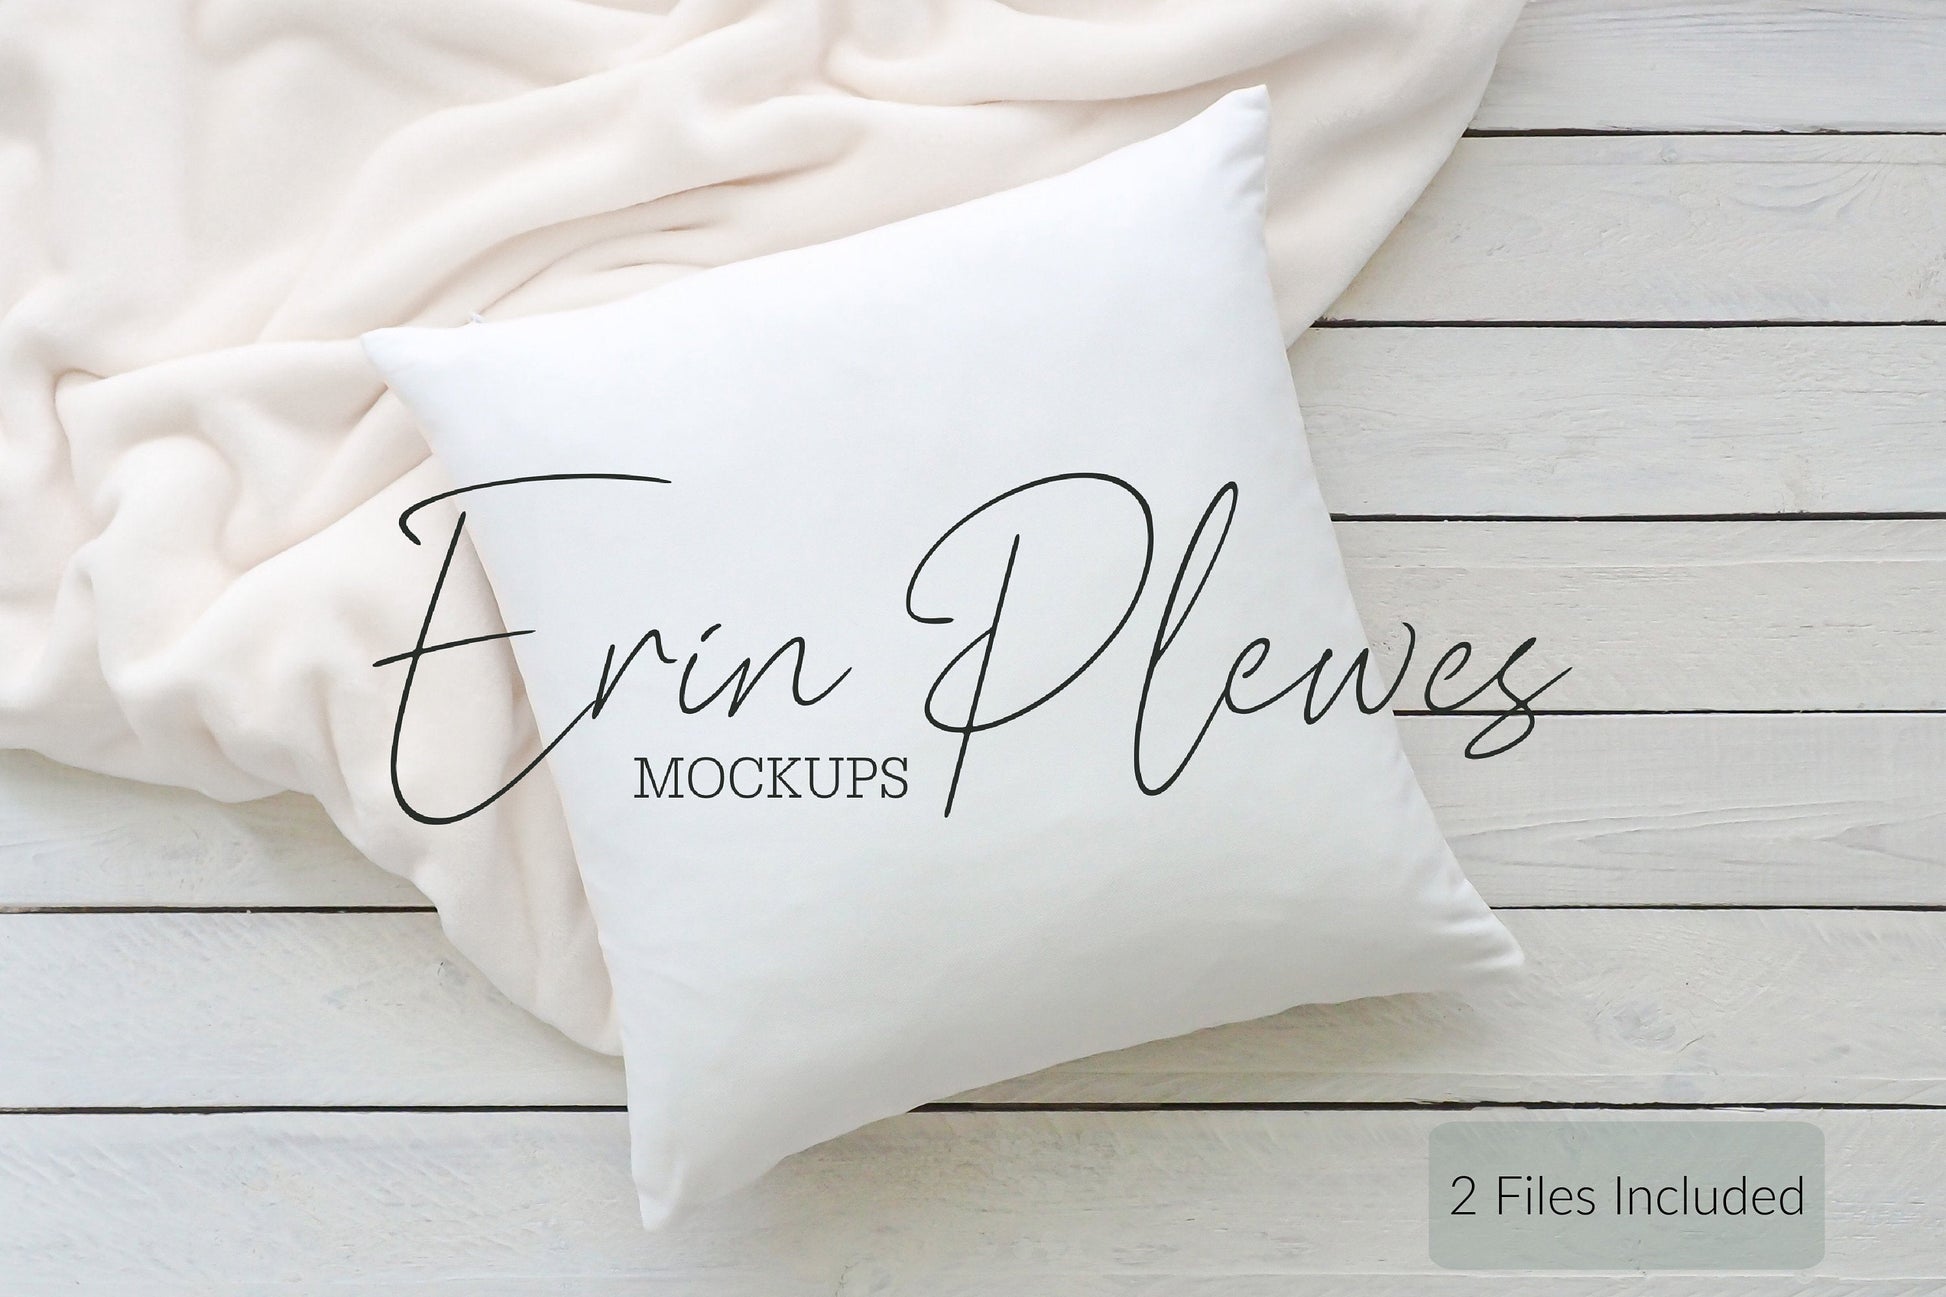 Pillow Mock ups, Pillow case mockup with white blanket on rustic wood floor, Minimalist cushion stock photo, Jpeg Instant Digital Download